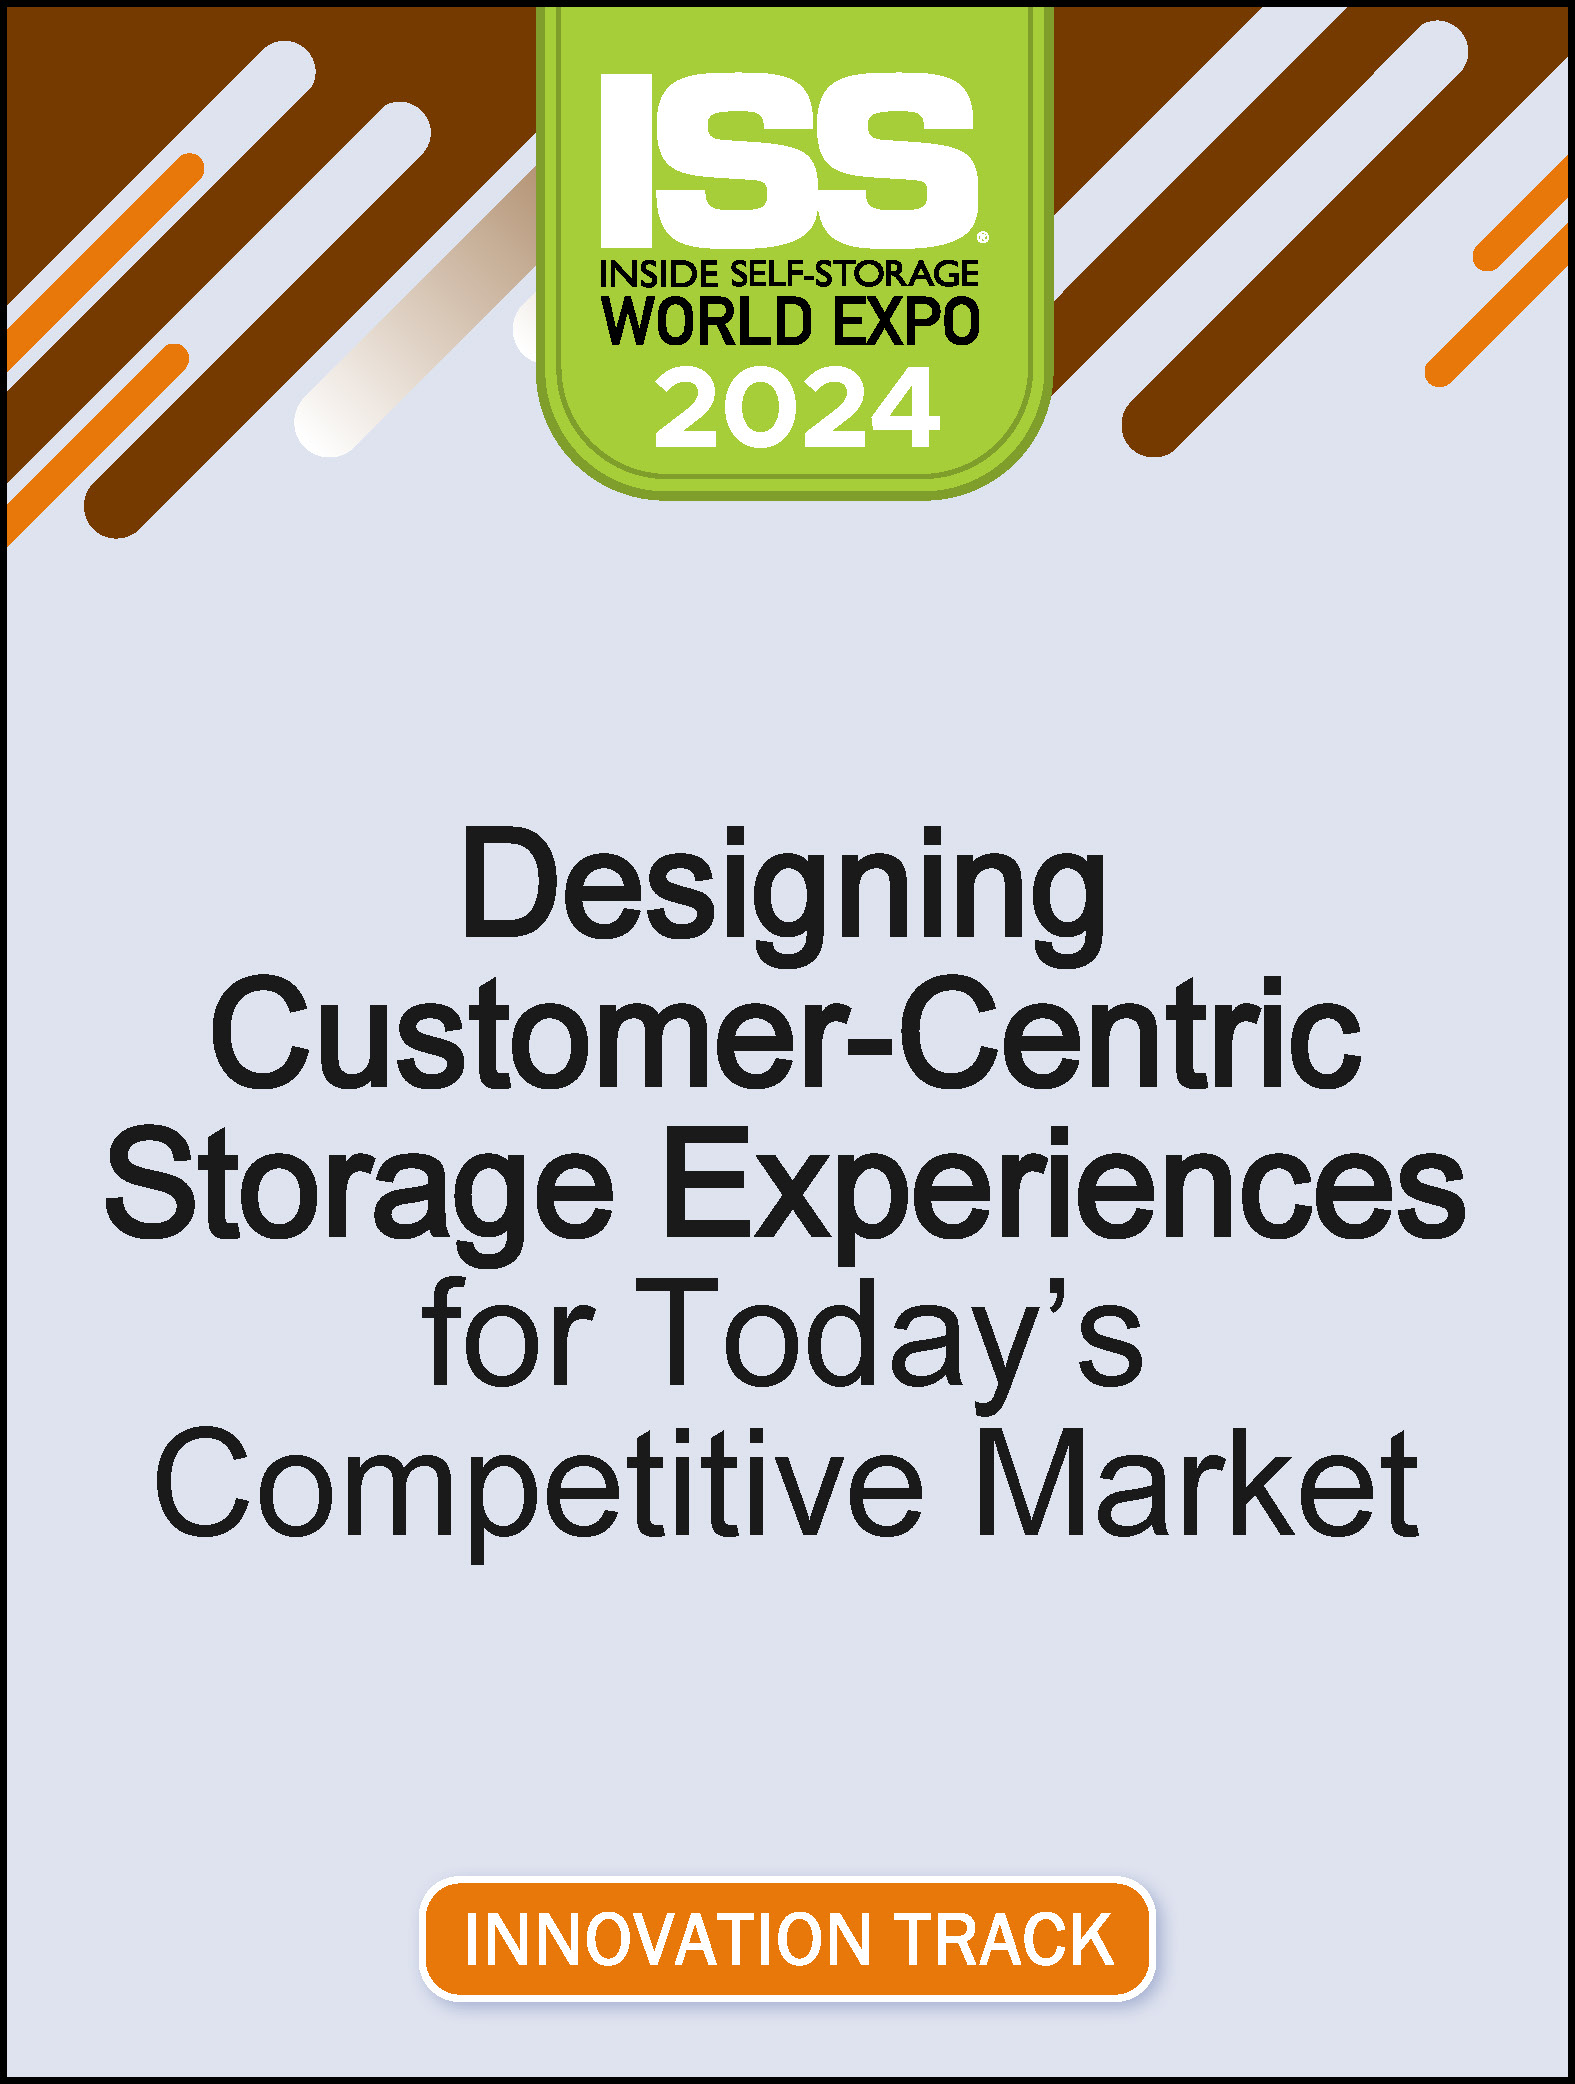 Video Pre-Order Sub - Designing Customer-Centric Self-Storage Experiences for Today’s Competitive Market